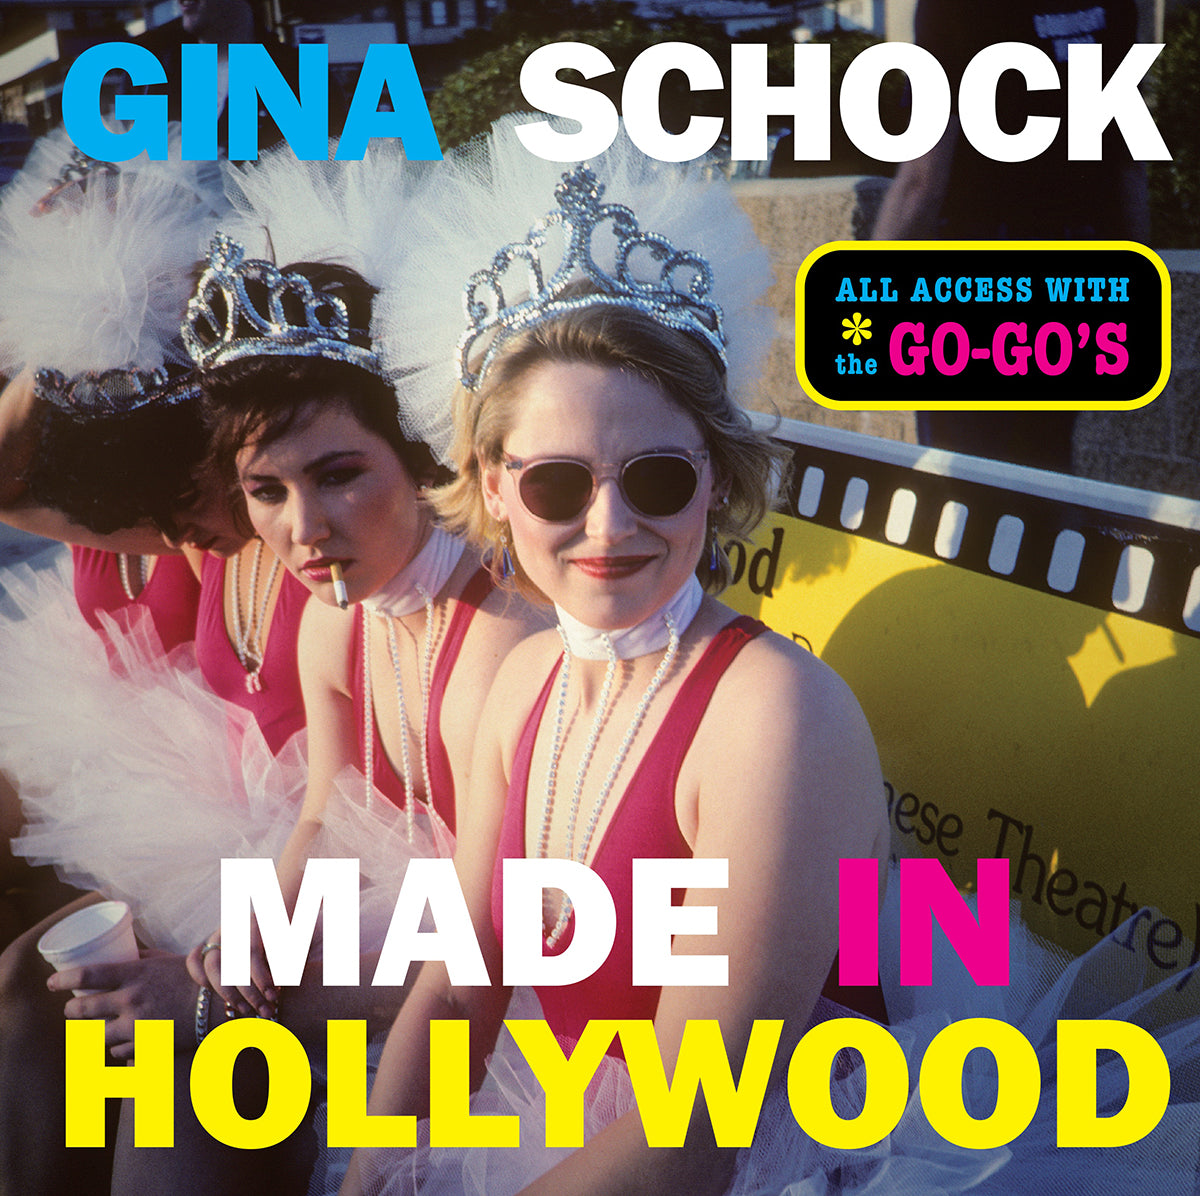 GINA SCHOCK - MADE IN HOLLYWOOD  - HARDCOVER BOOK